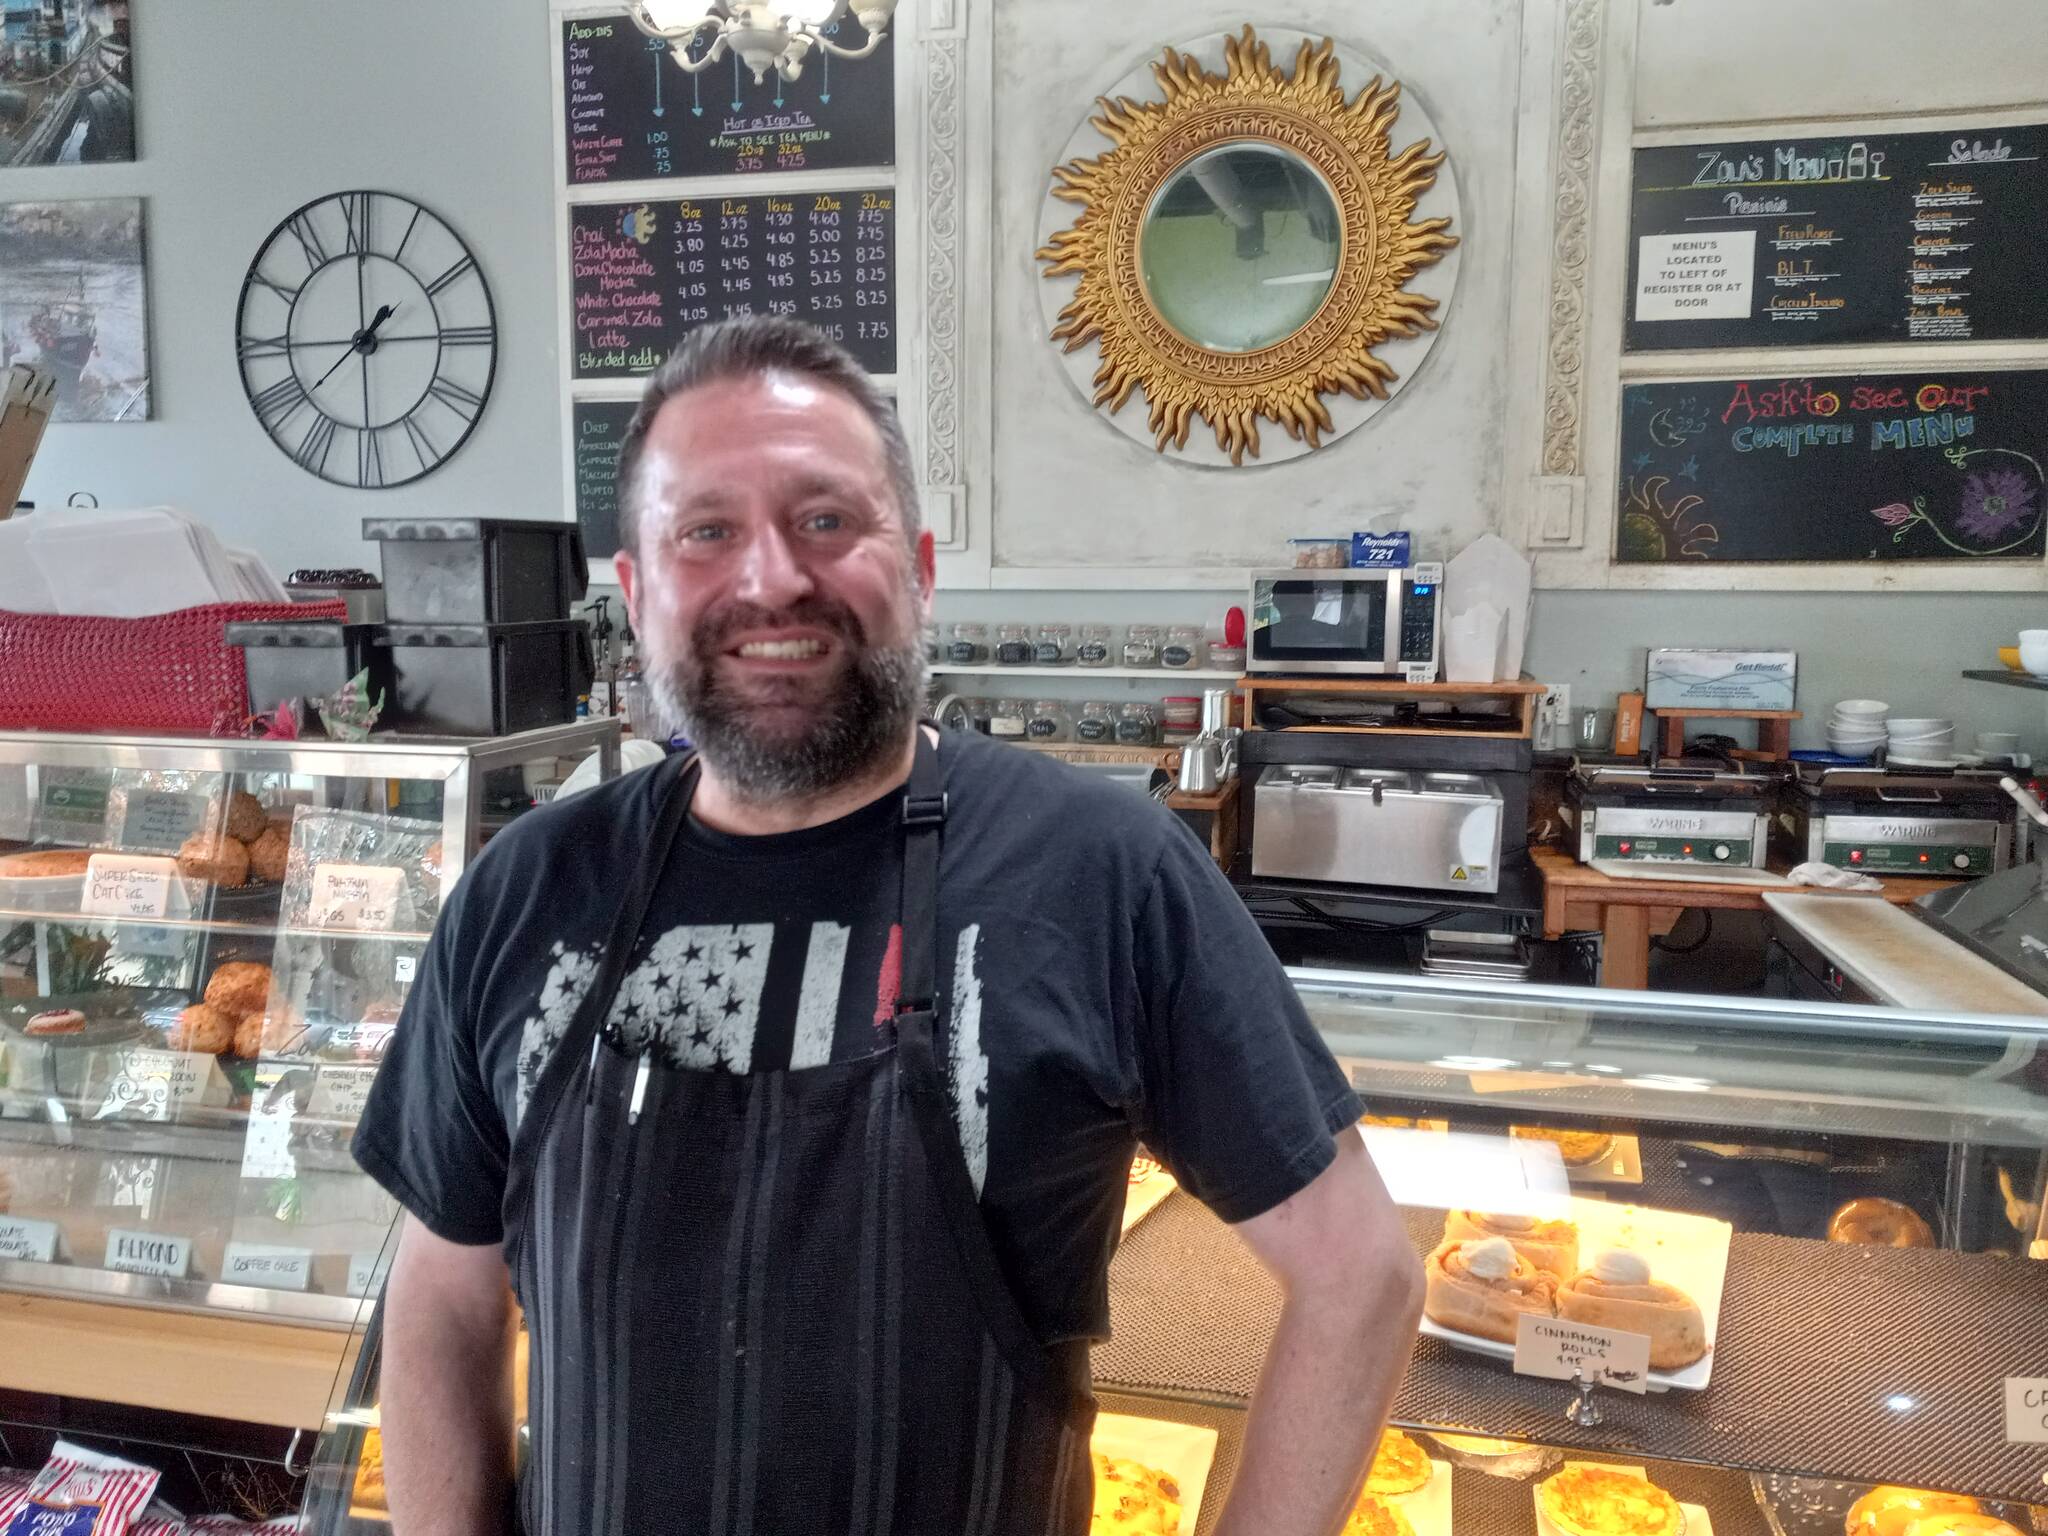 Photo by Robert Whale/Auburn Reporter
Zola’s Café owner Matt Noesen is ready for normal times and business to resume at his downtown Auburn eatery.